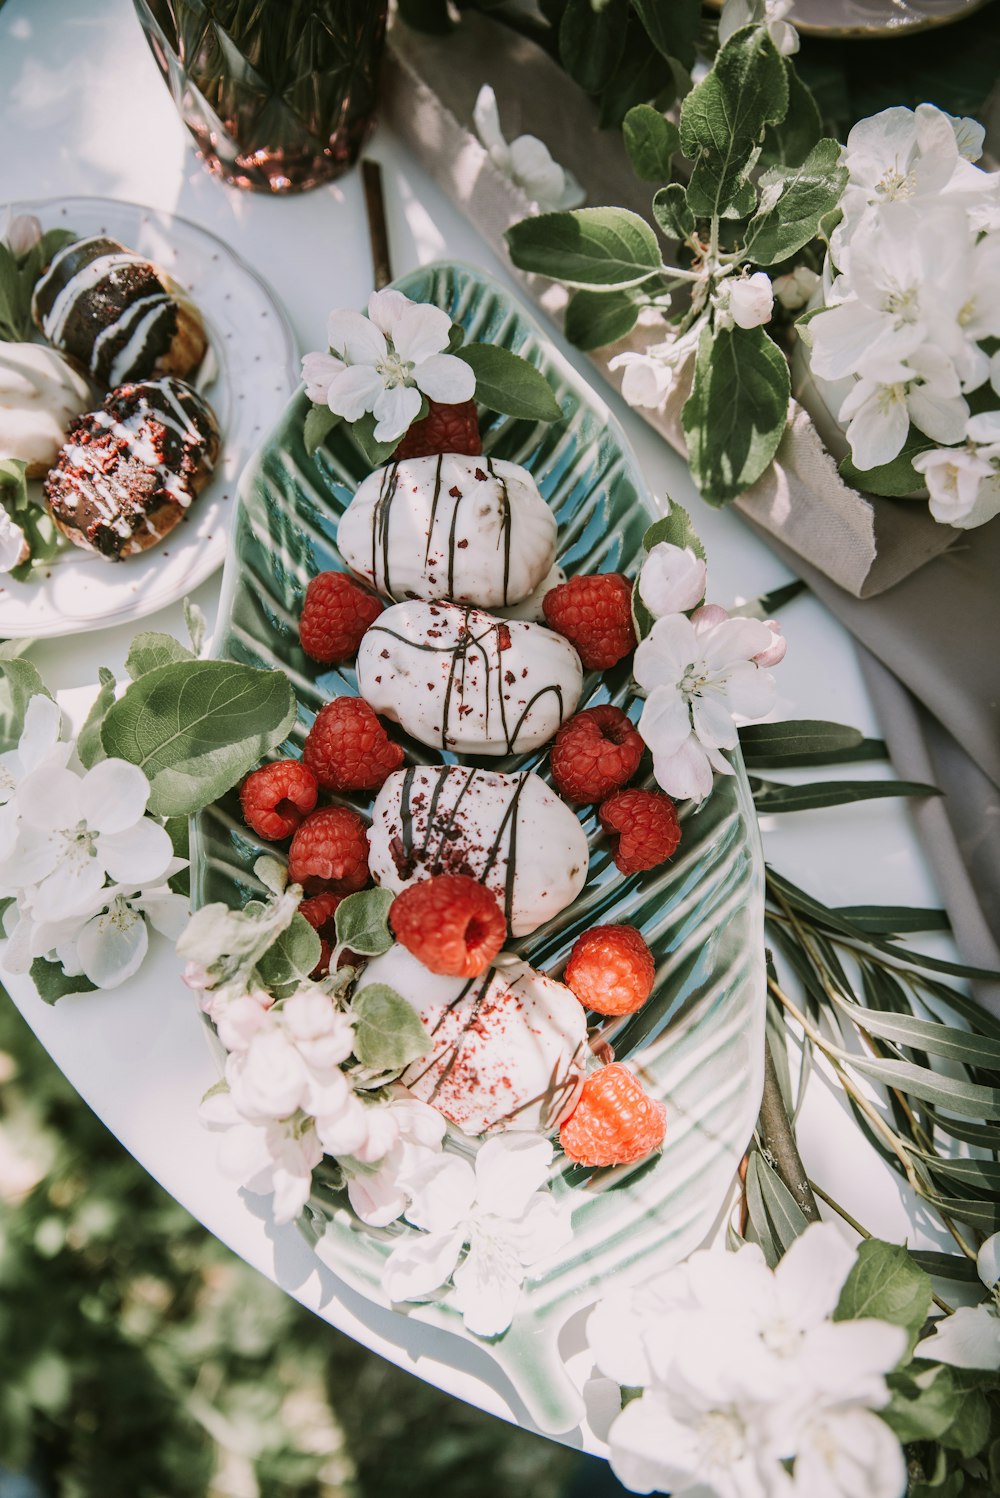 a platter of strawberries and other desserts on a table